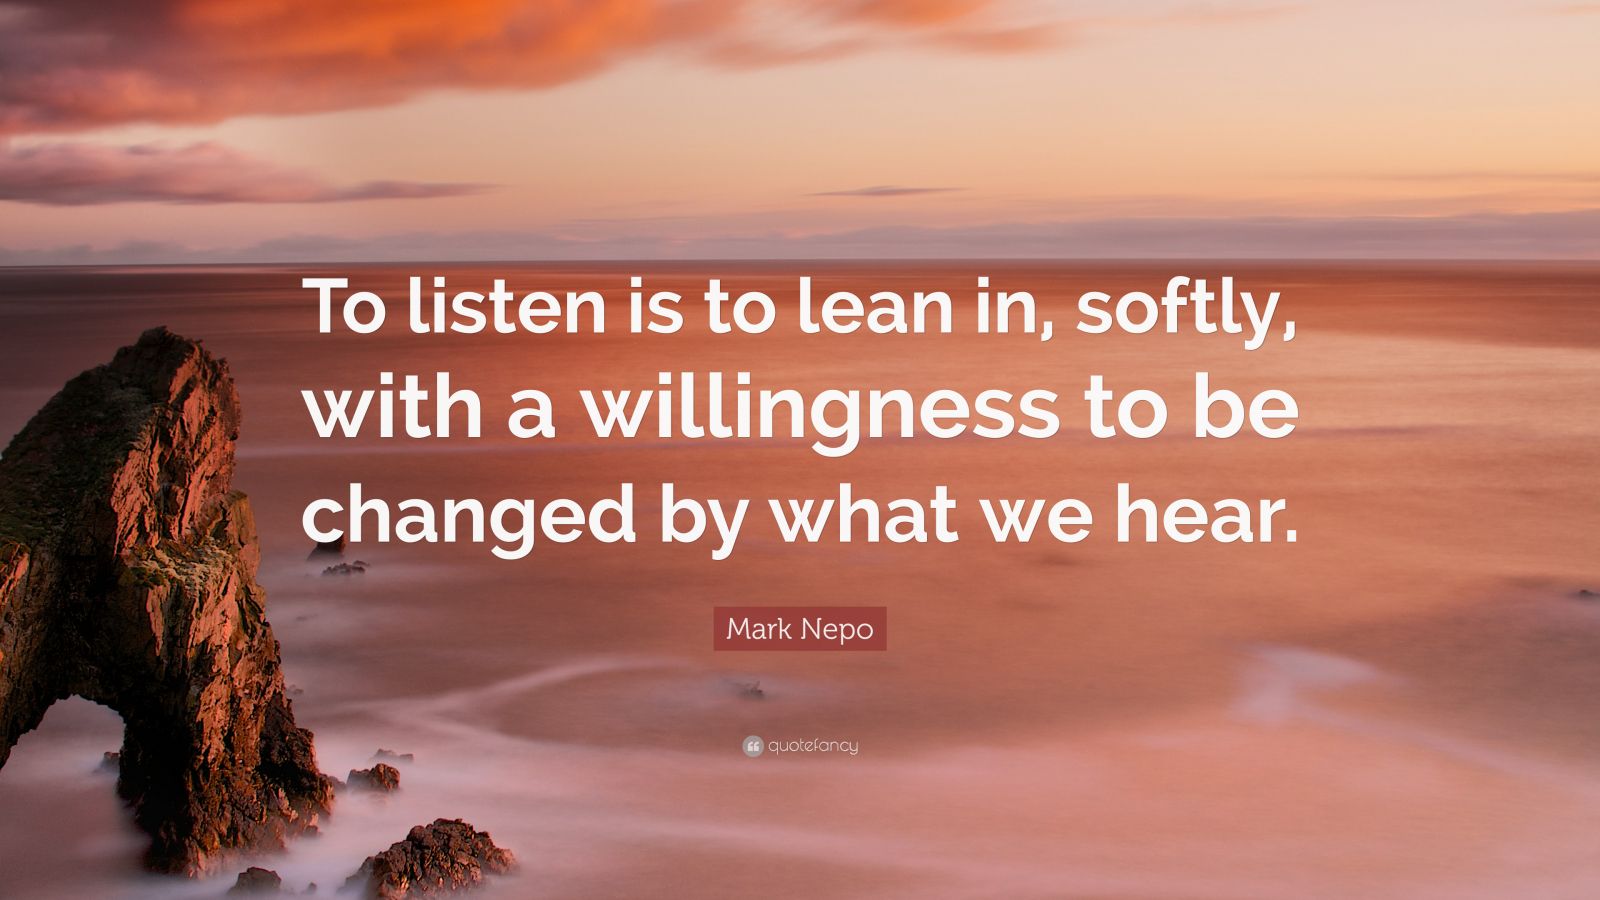 4718728 Mark Nepo Quote To listen is to lean in softly with a willingness